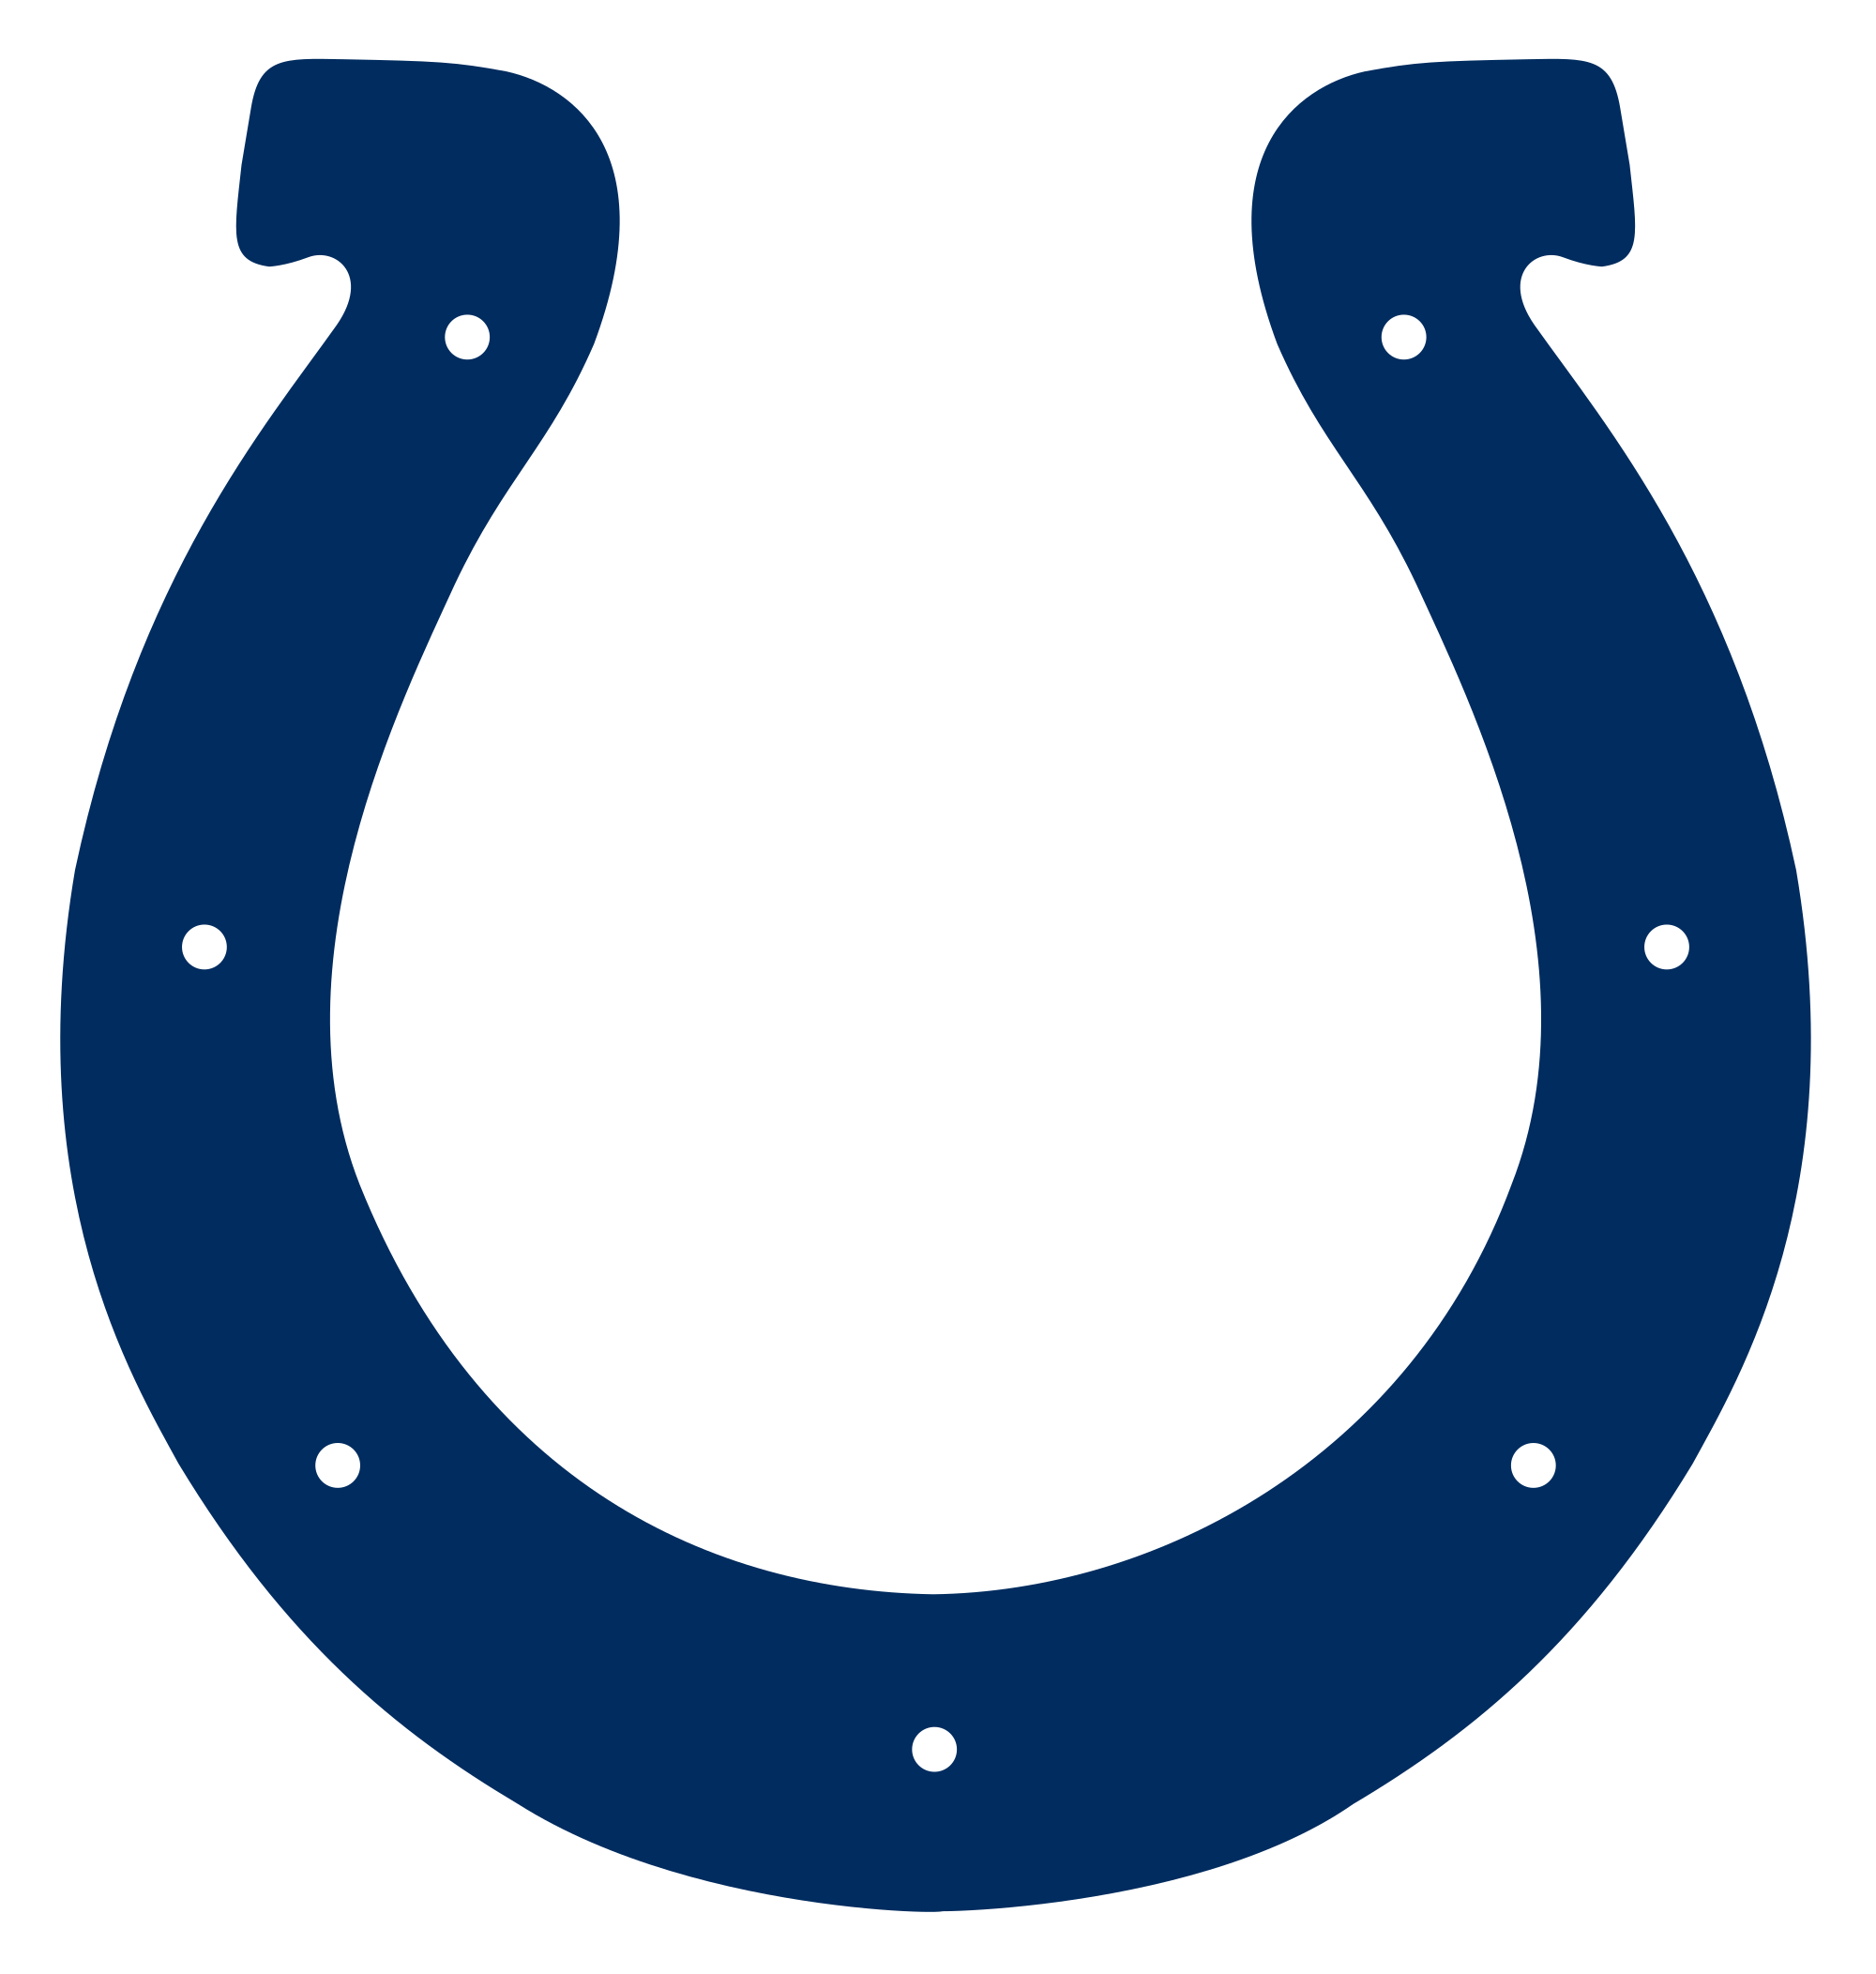 Colts Logo - File:Indianapolis Colts logo.svg - Wikimedia Commons